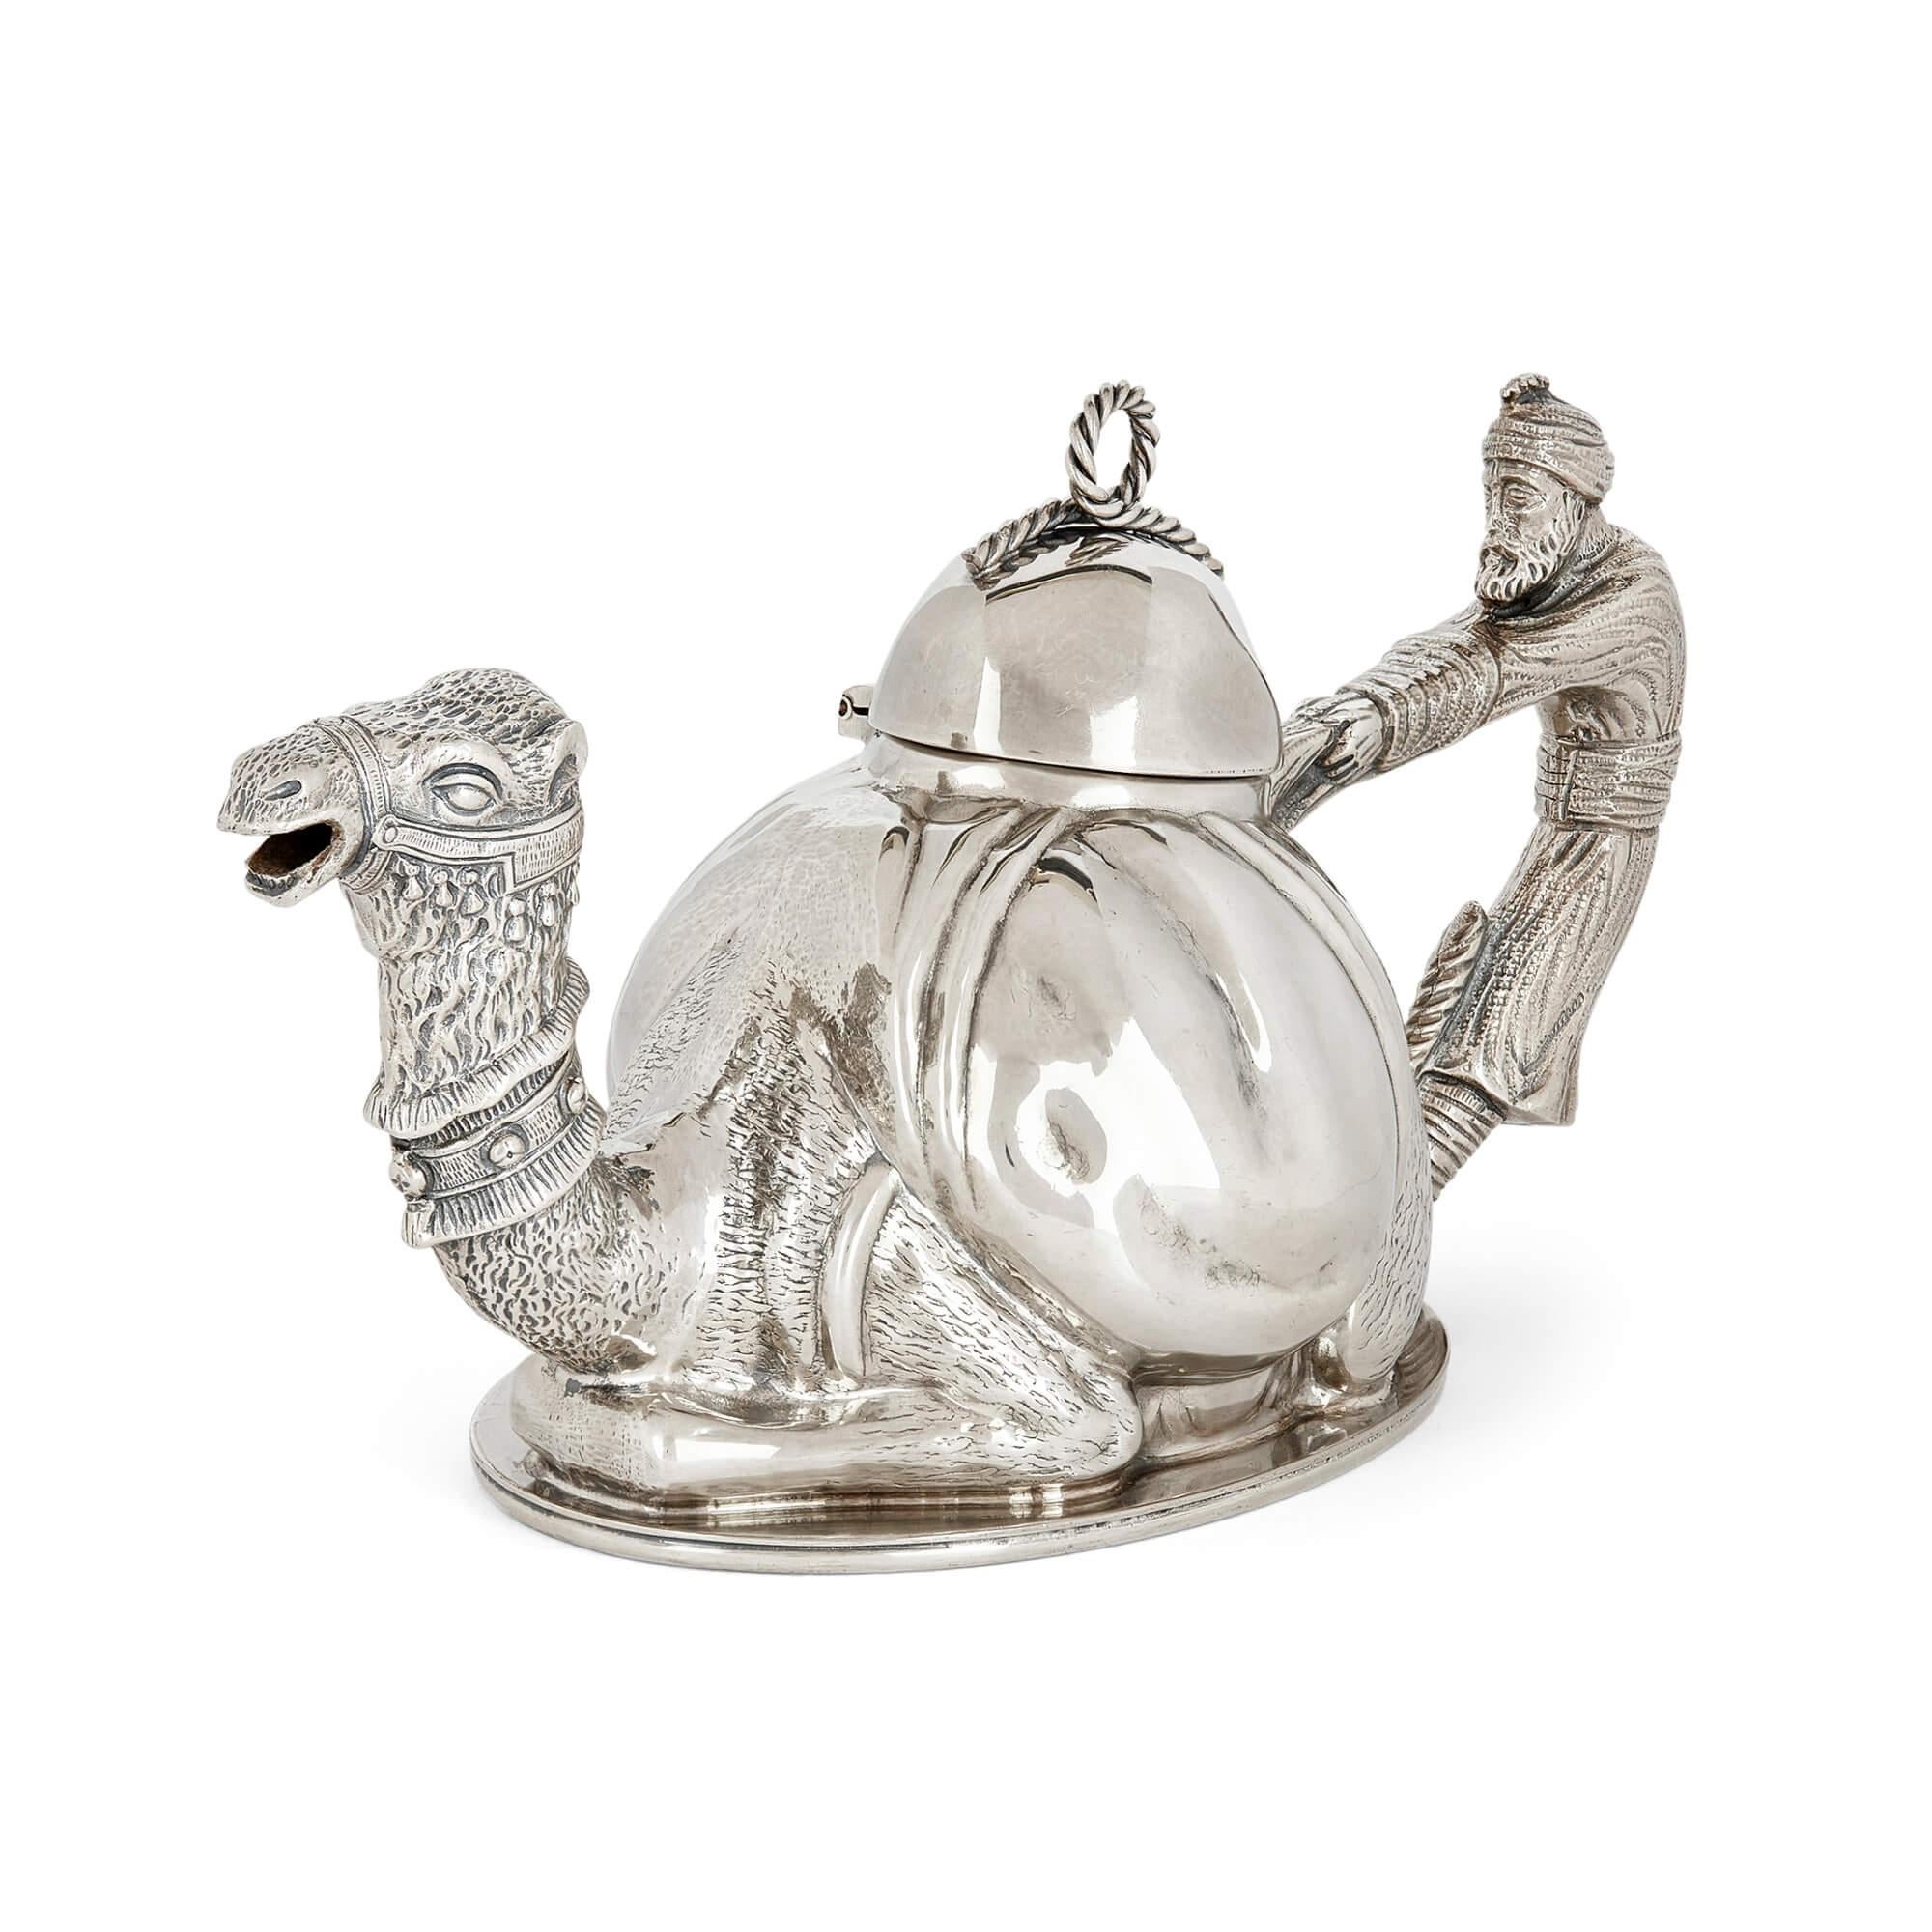 French silver-plated teapot with camel design 
French, 20th Century
Height 14cm, width 27cm, depth 12cm

Produced by the much-esteemed Parisian tea company Mariage Frères, this delightful teapot, titled 'Karawan', is a fine example of creative